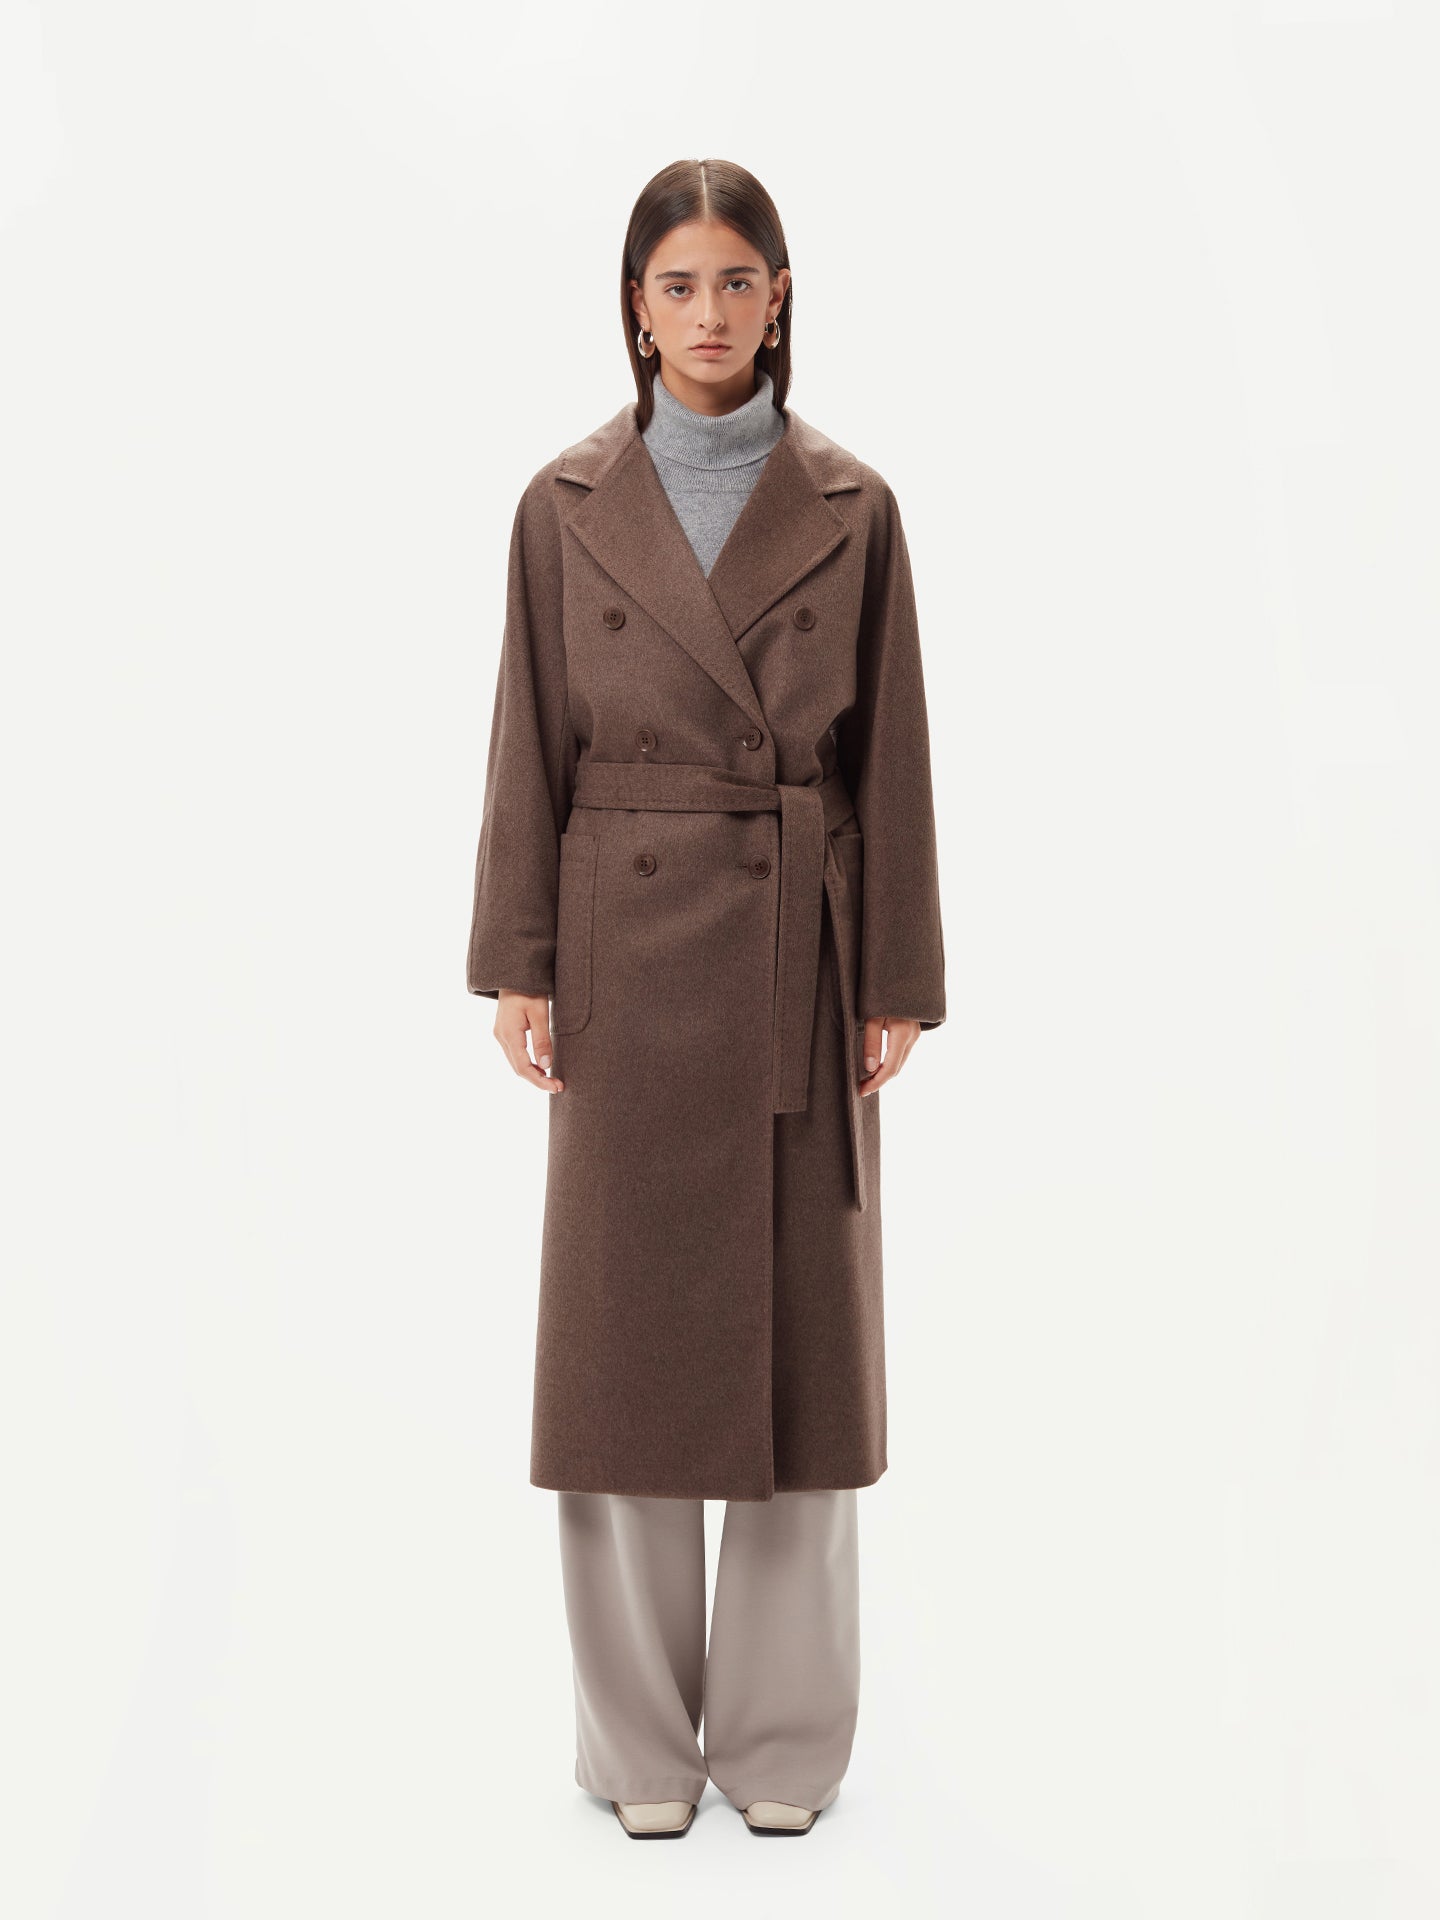  Women's Double Cashmere Breasted Long Coat cacao - Gobi Cashmere